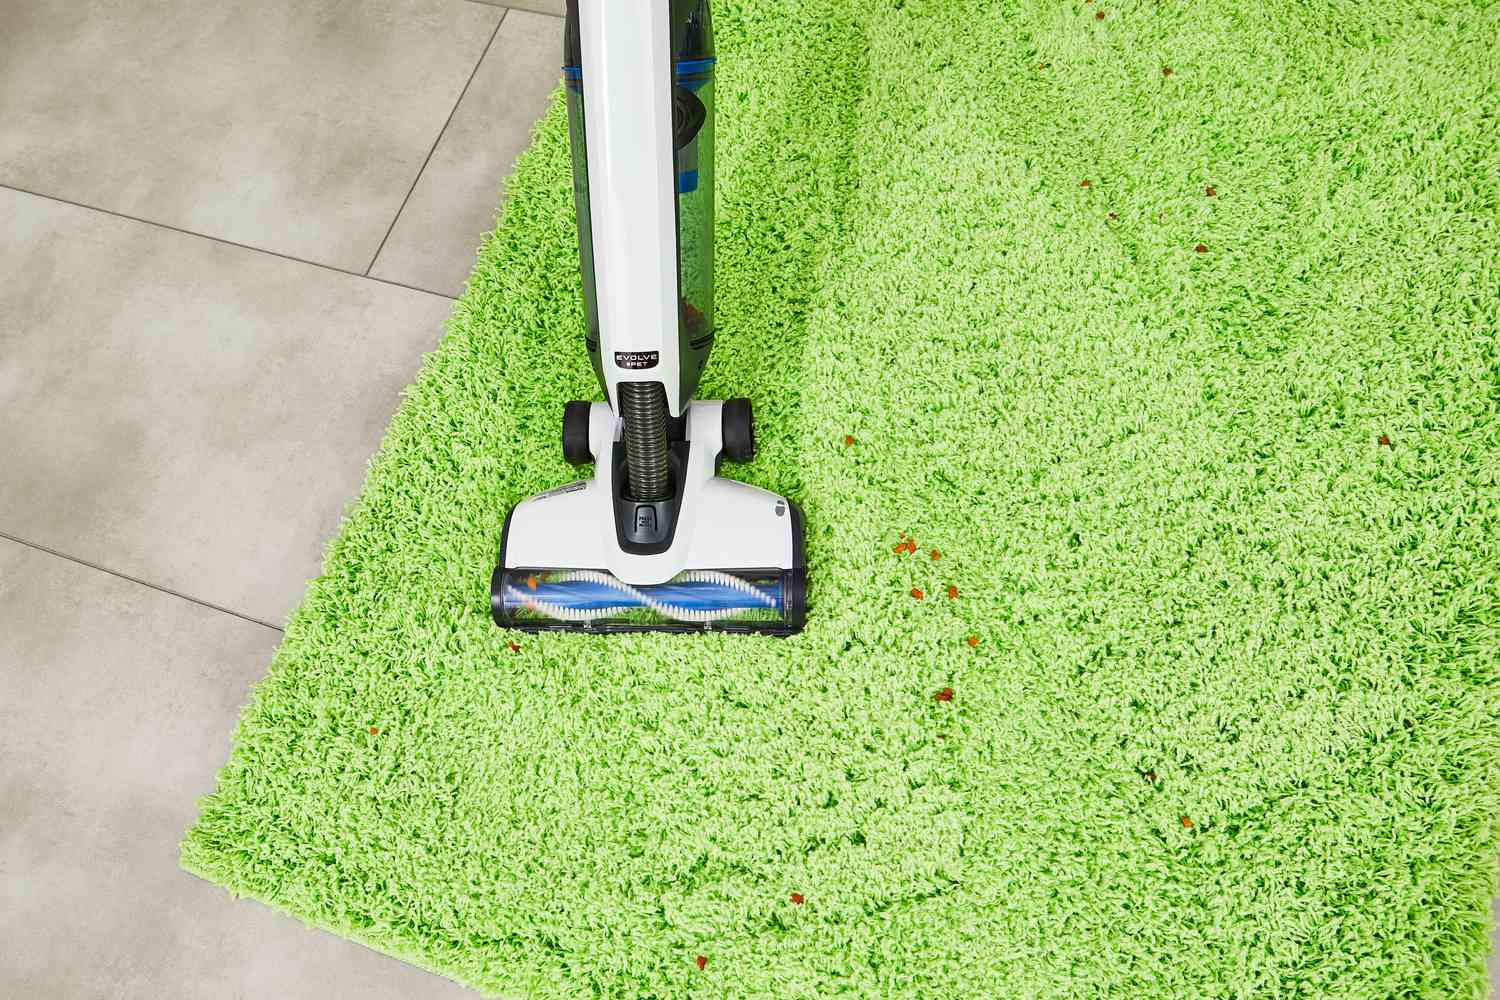 Hoover Onepwr Evolve Pet Cordless Vacuum cleaning food from green carpet